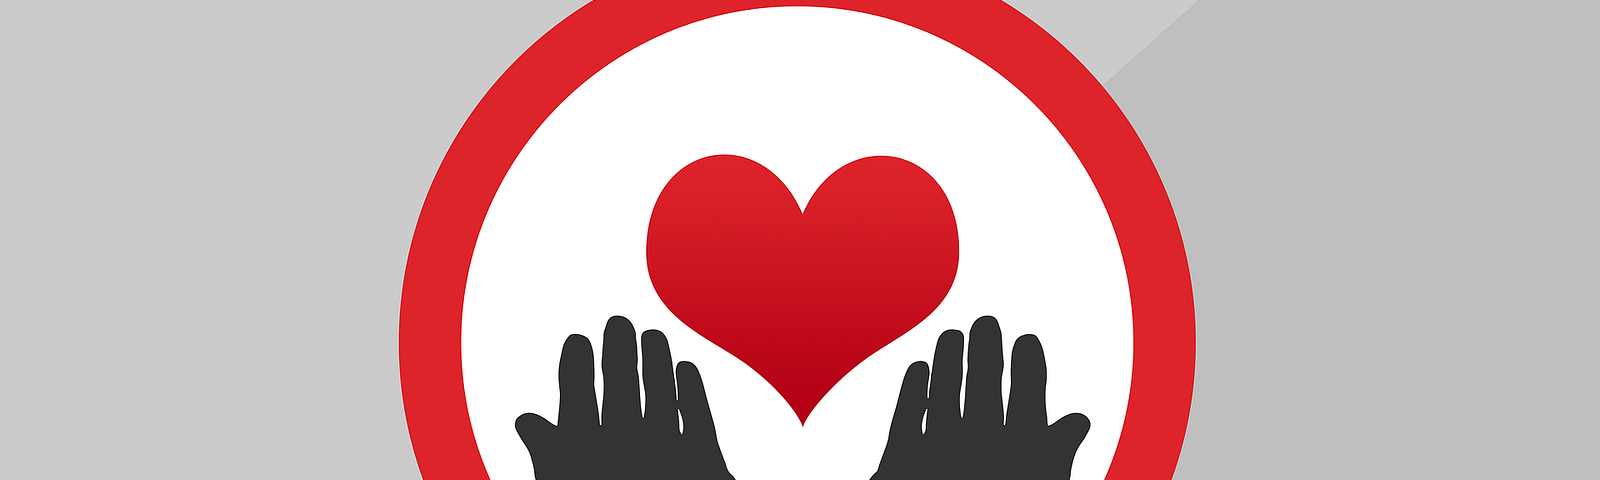 A circle outlined in red; inside the circle two silhouetted, outstretched hands reach out to a red heart.